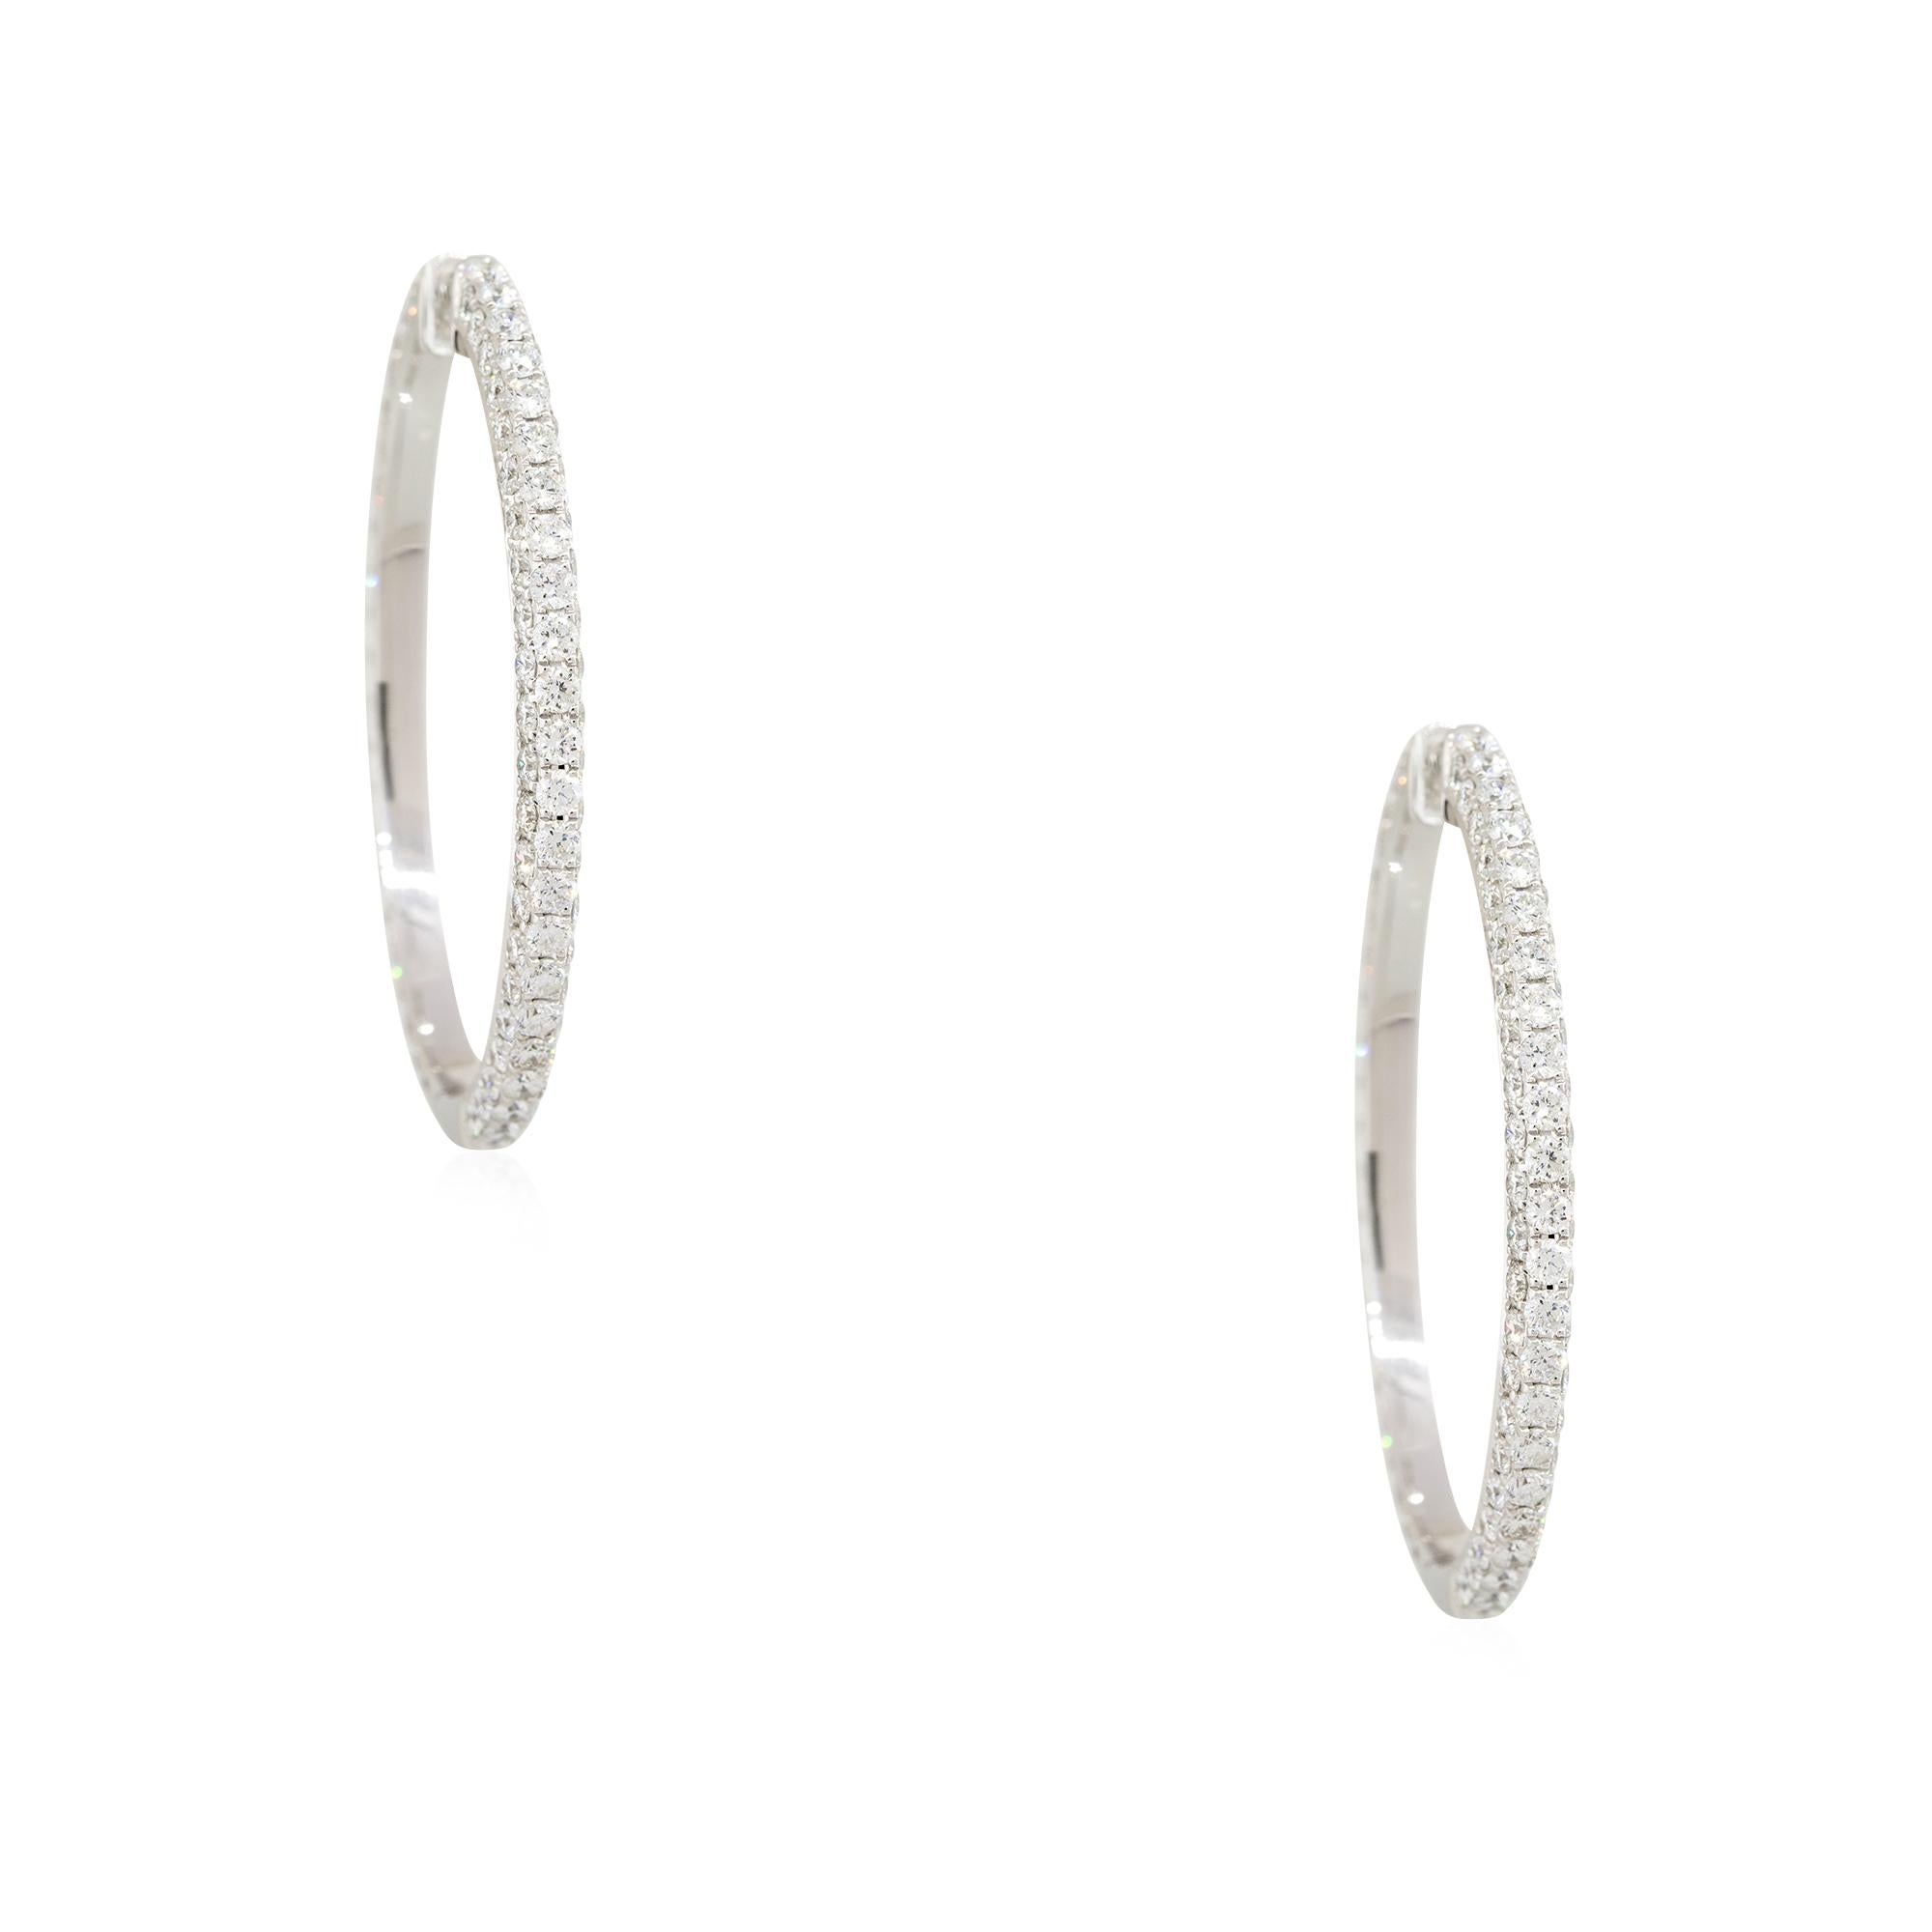 18k White Gold 8.29ctw Round Brilliant Diamond Large Hoop Earrings
Material: 18k White Gold
Diamond Details: Approximately 8.29ctw of Round Brilliant cut Diamonds. Diamonds are set in rows across 3 sides of the hoop earrings. The diamonds are not